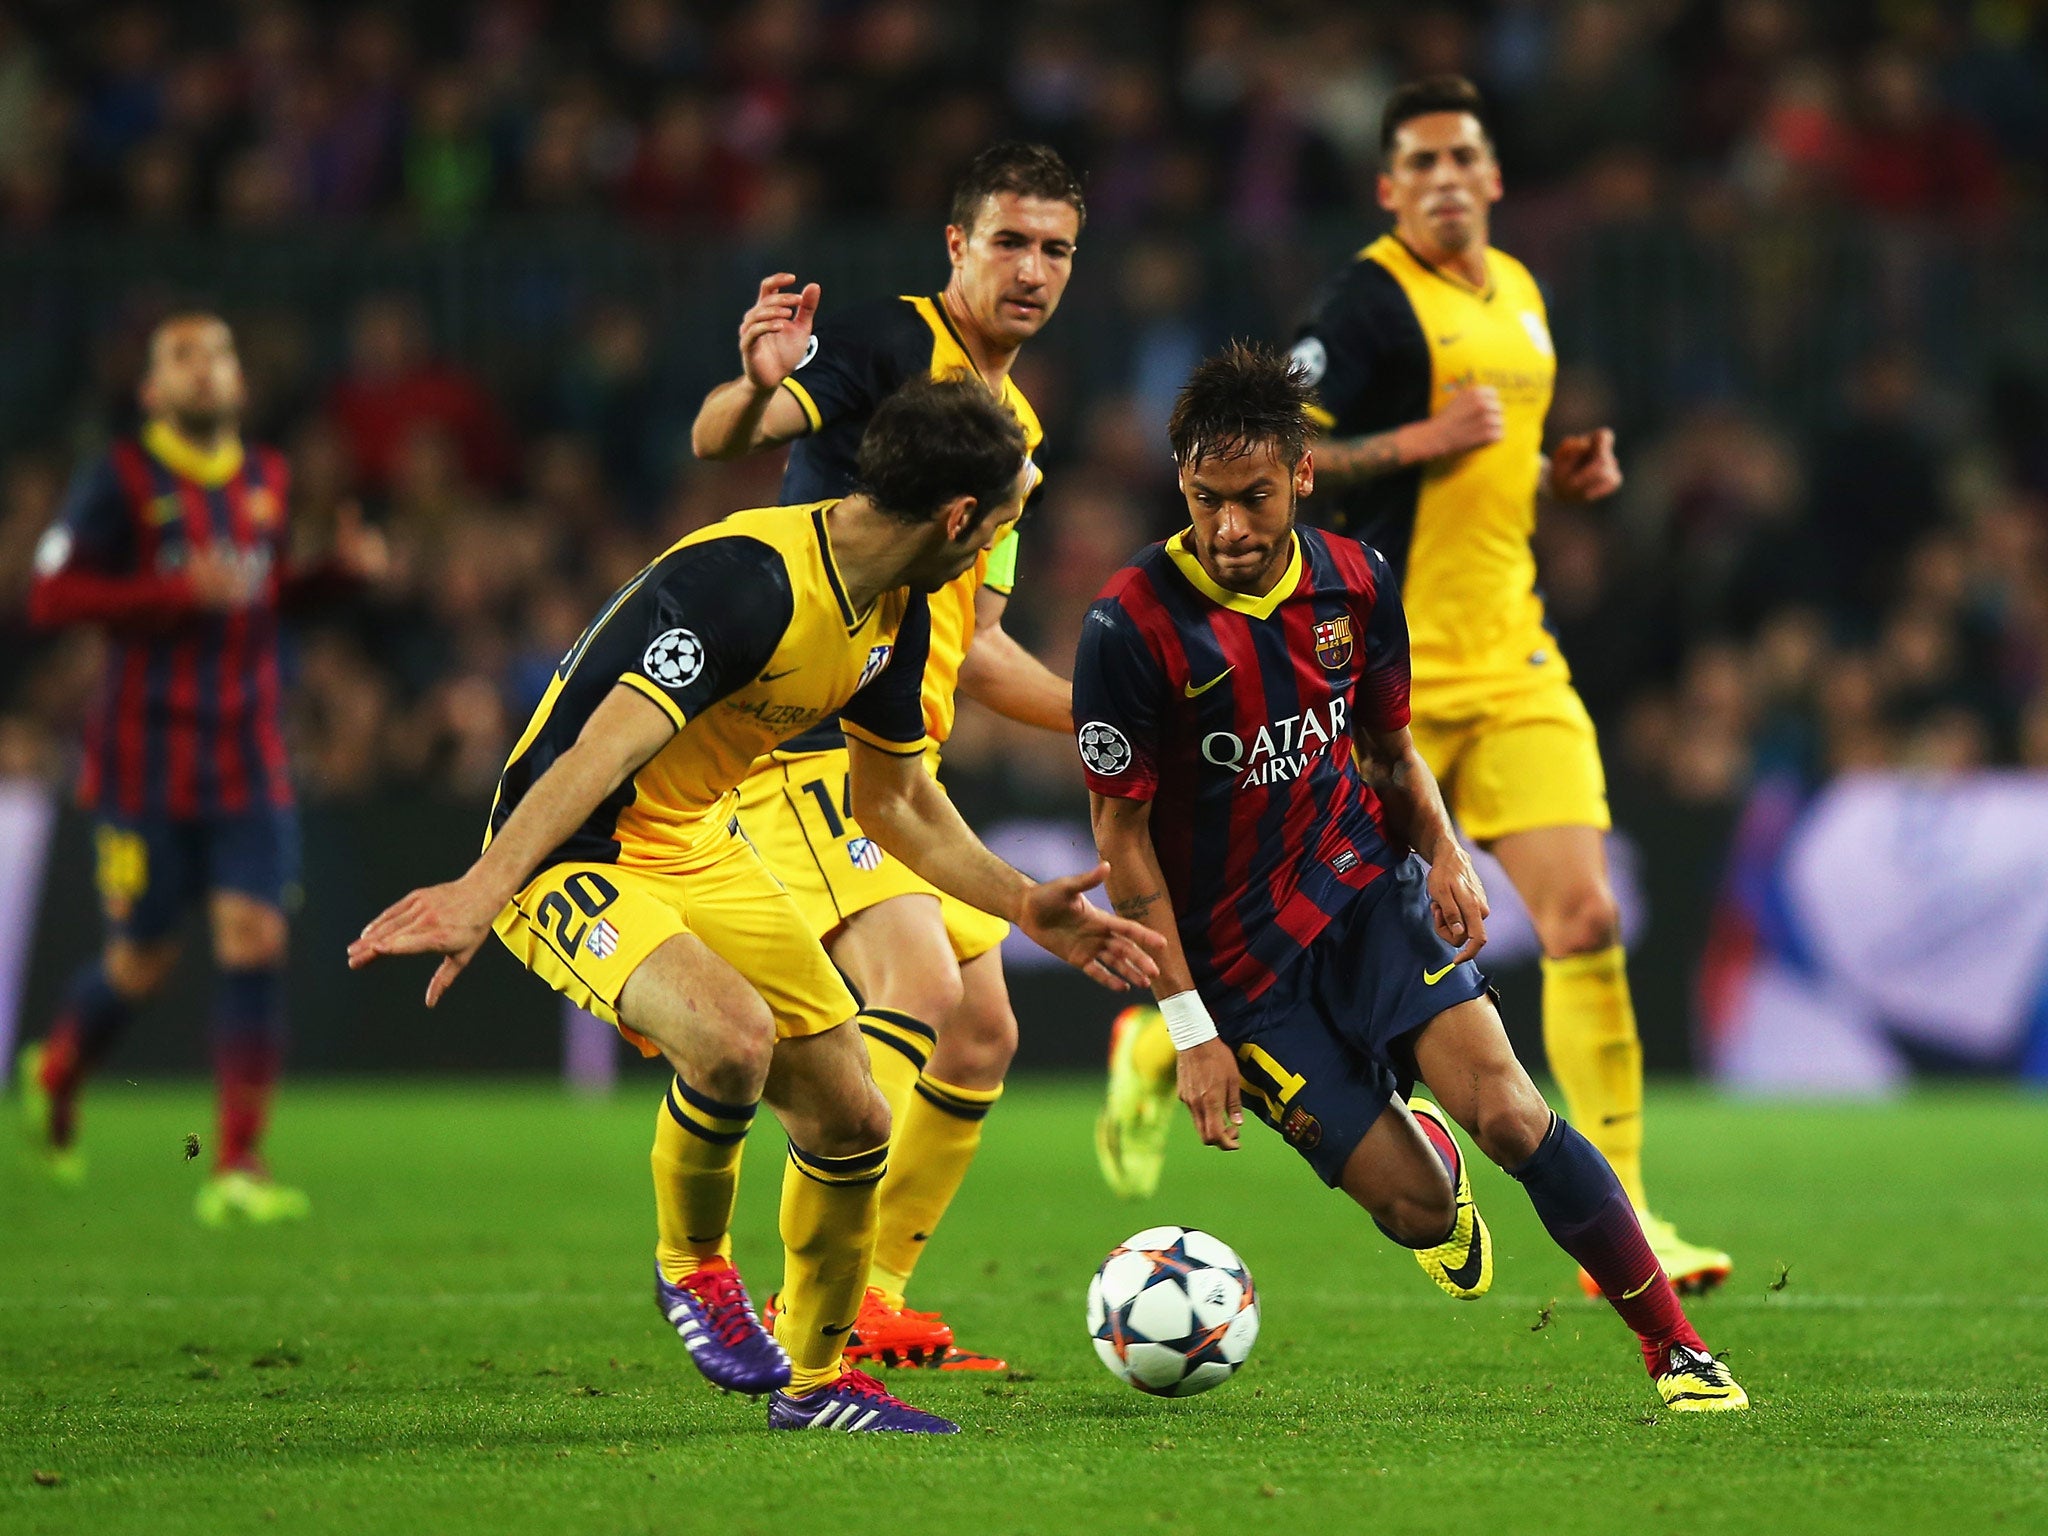 Neymar of Barcelona takes on Juanfran of Club Atletico de Madrid during the UEFA Champions League Quarter Final first leg